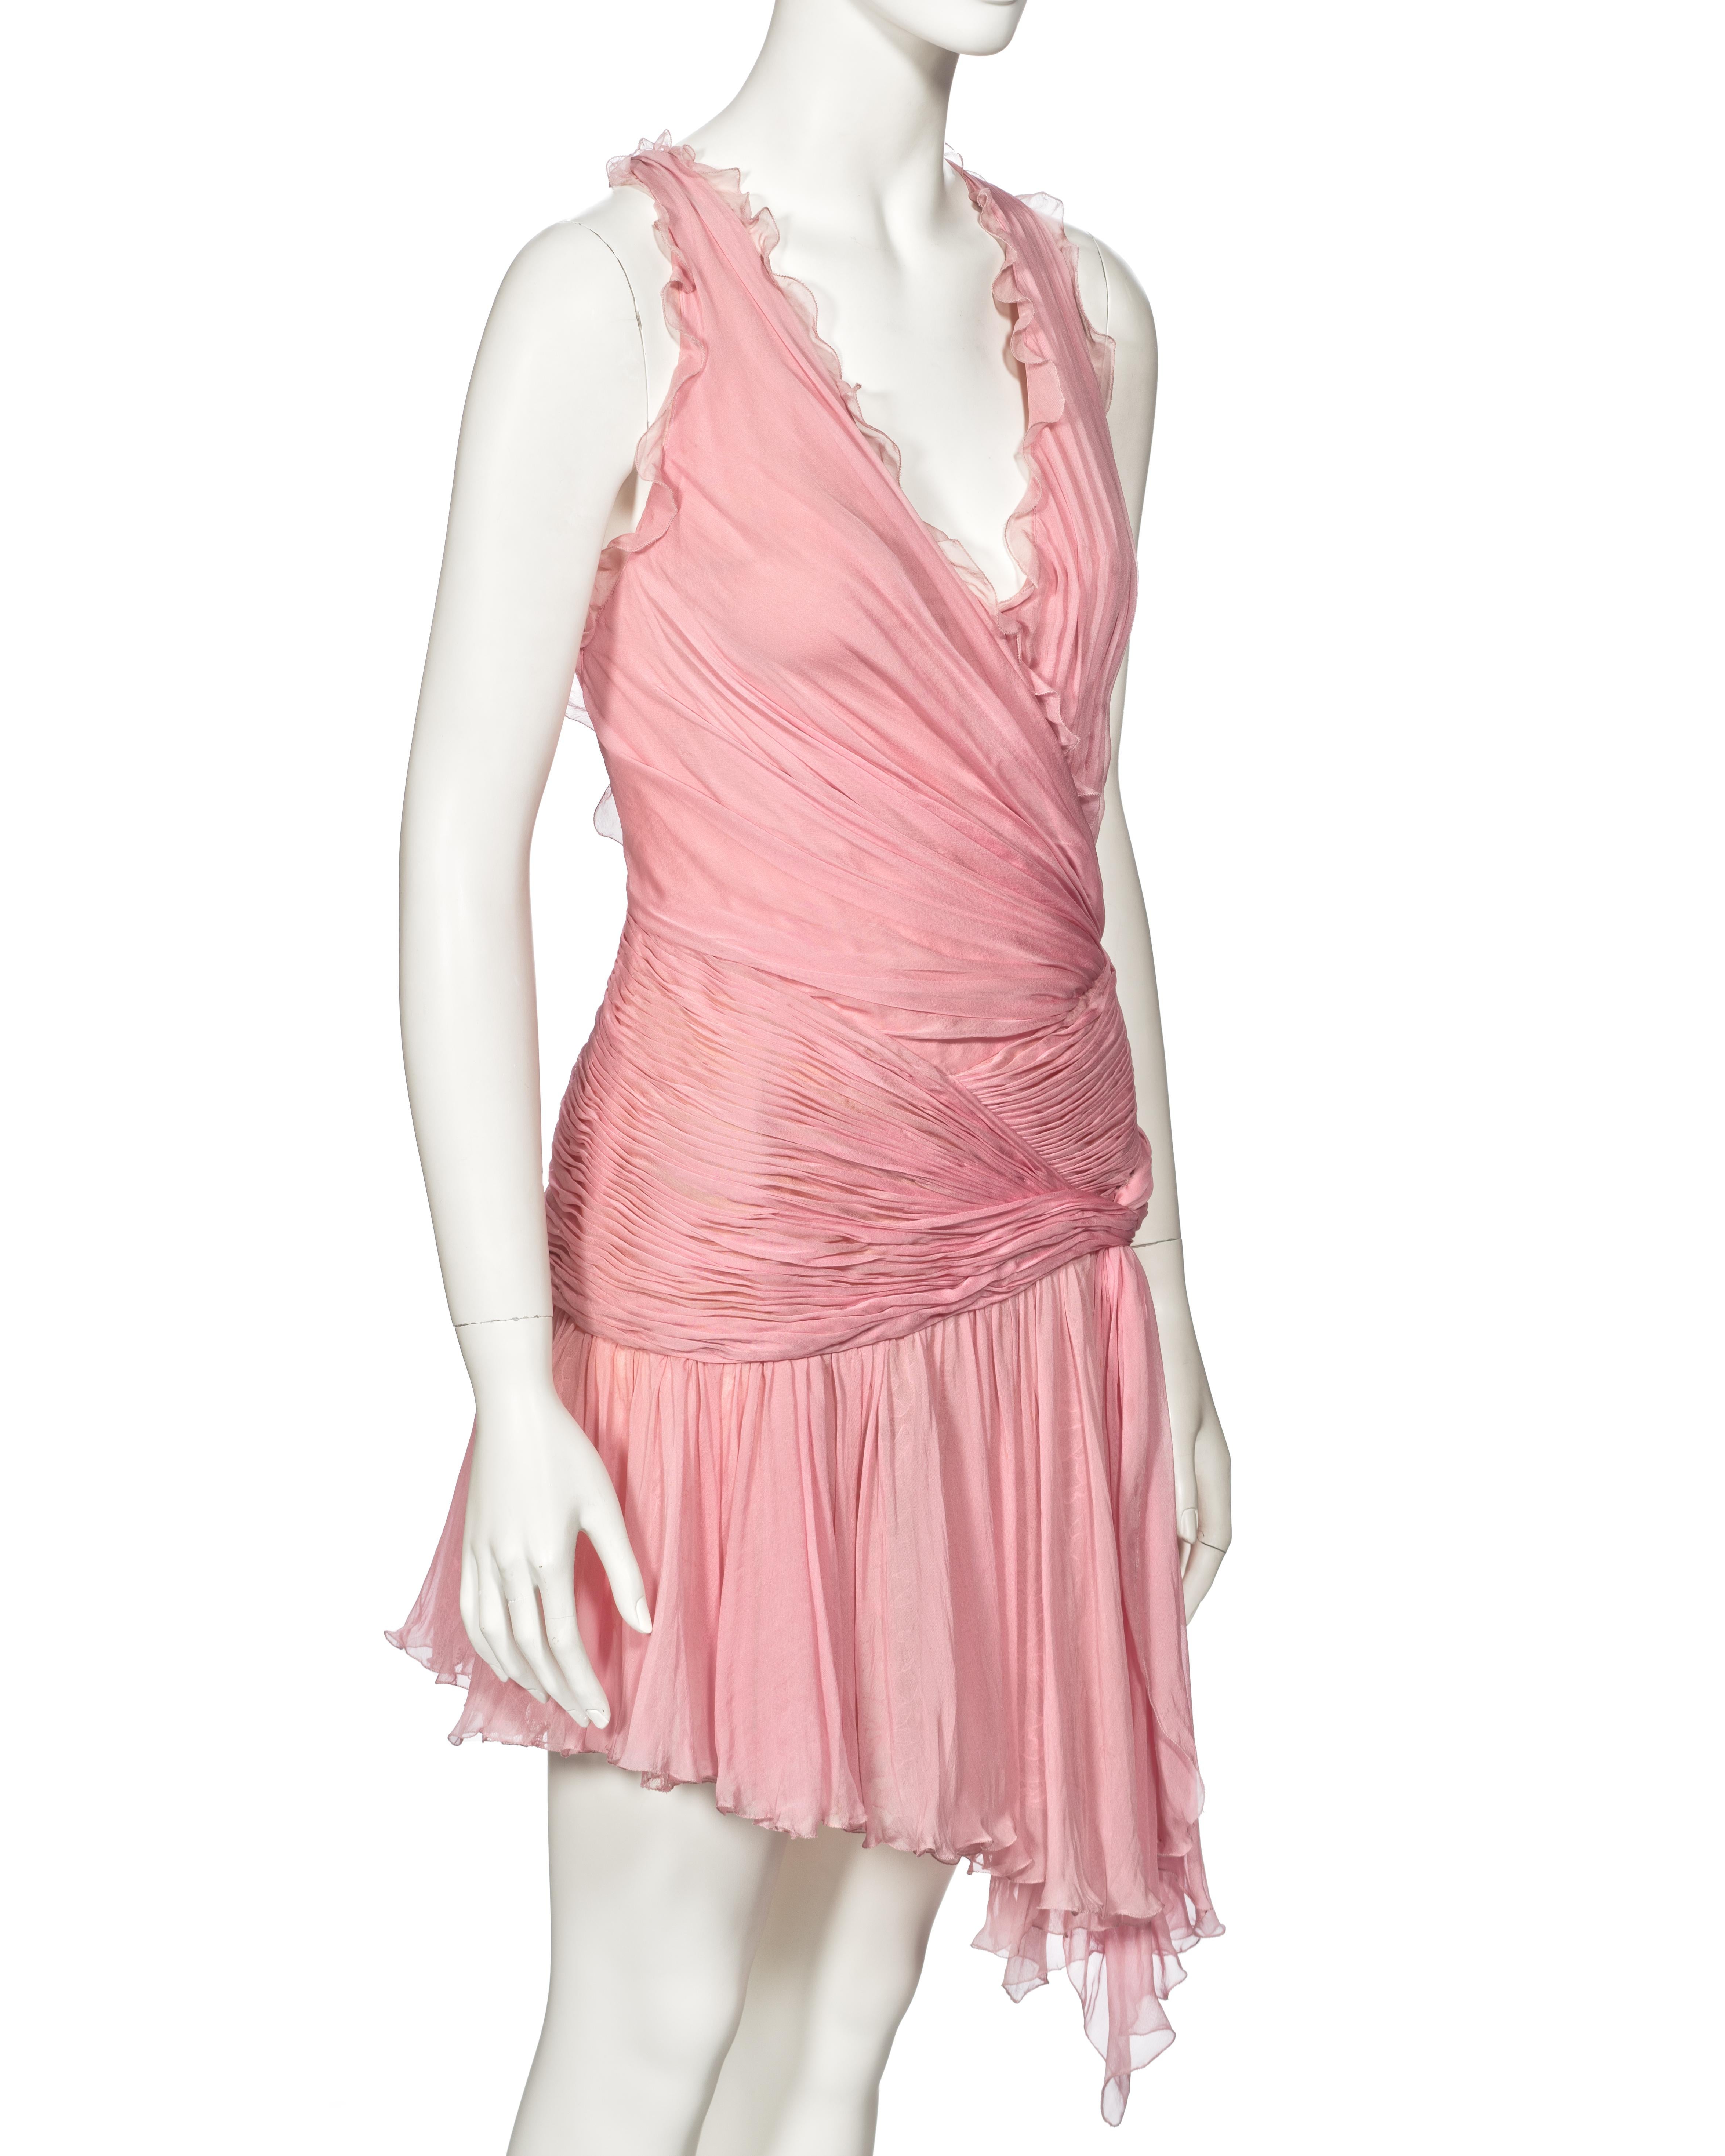 Atelier Versace Couture Pink Pleated Silk and Lace Mini Dress, ss 2004 For Sale 2